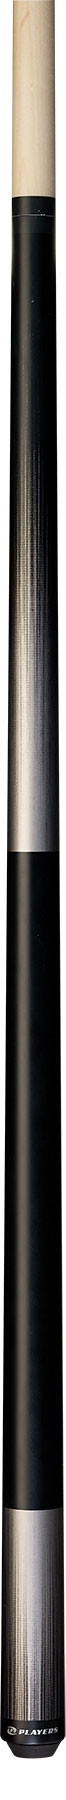 Players C-701 Pool Cue